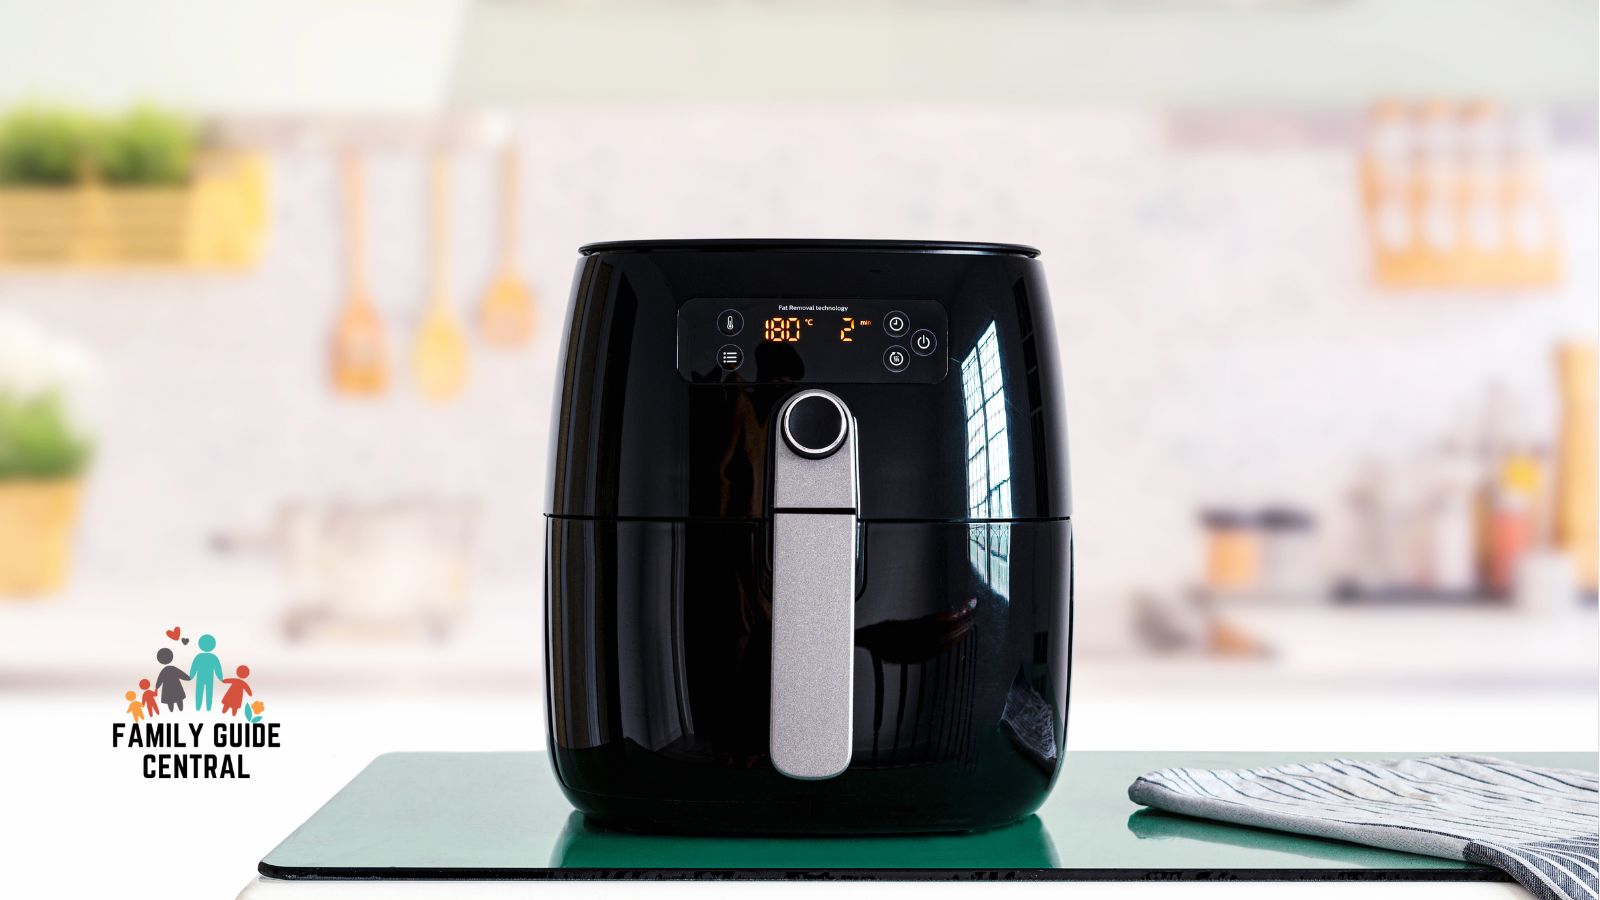 Air fryer on display in the middle - familyguidecentral.com